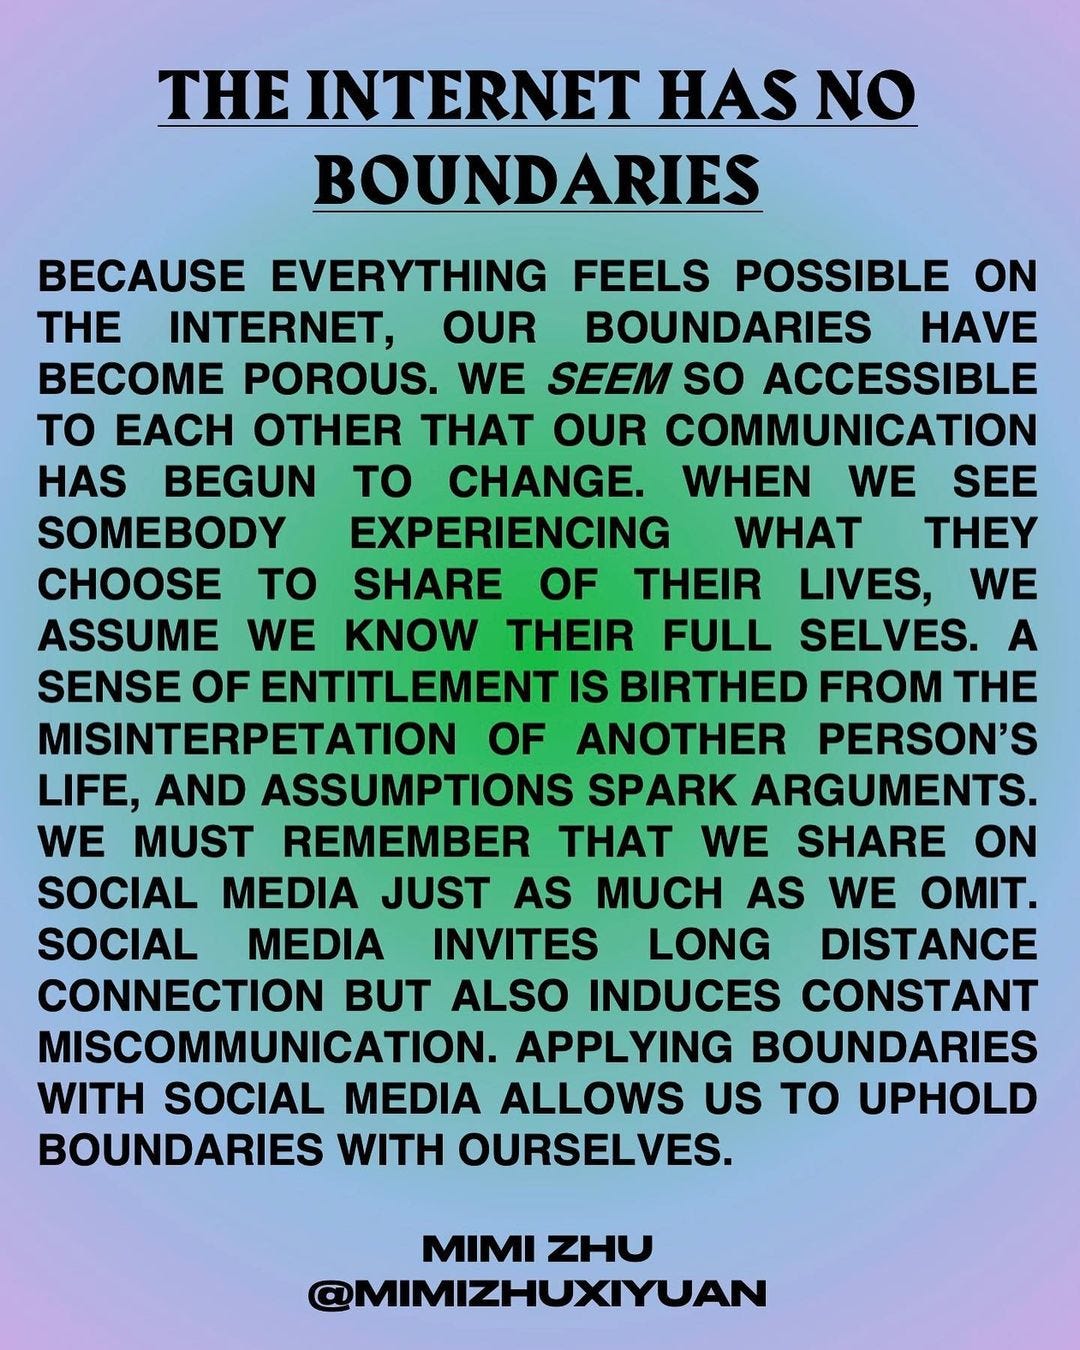 A quote that reads, "The Internet Has No Boundaries. Because everything feels possible on the internet, our boundaries have become porous. We seem so accessible to each other that our communication has begun to change. When we see somebody experiencing what they choose to share of their lives, we assume we know their full selves. A sense of entitlement is birthed from the misinterpretation of another person's life, and assumptions spark arguments. We must remember that we share on social media just as much as we omit. Social media invites long distance connection but also induces constant miscommunication. Applying boundaries with social media allows us to uphold boundaries with ourselves." - Mimi Zhu @Mimizhuxiyuan